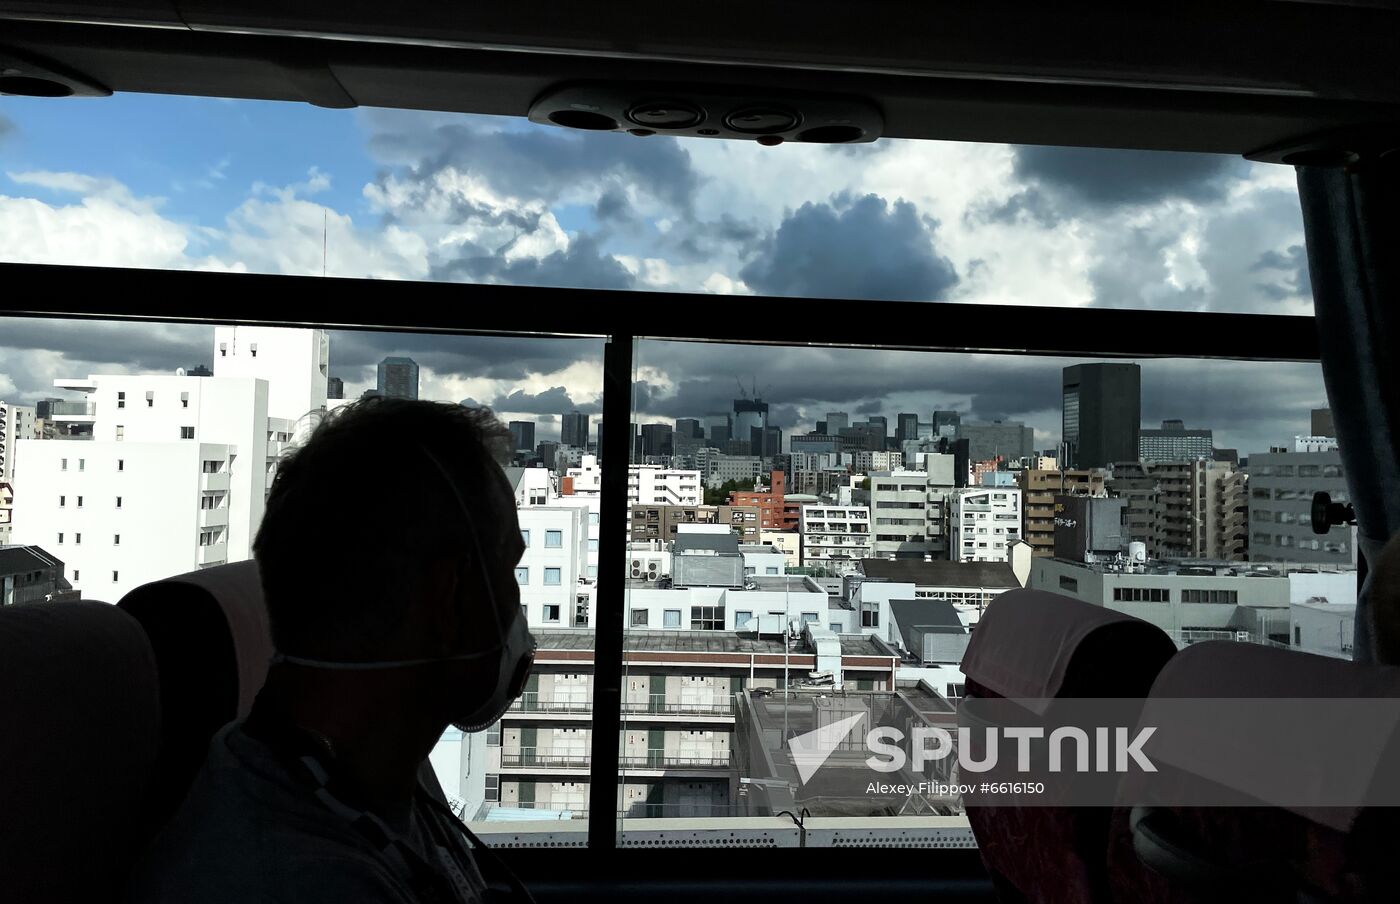 Japan Olympics 2020 Tokyo From Inside a Bus